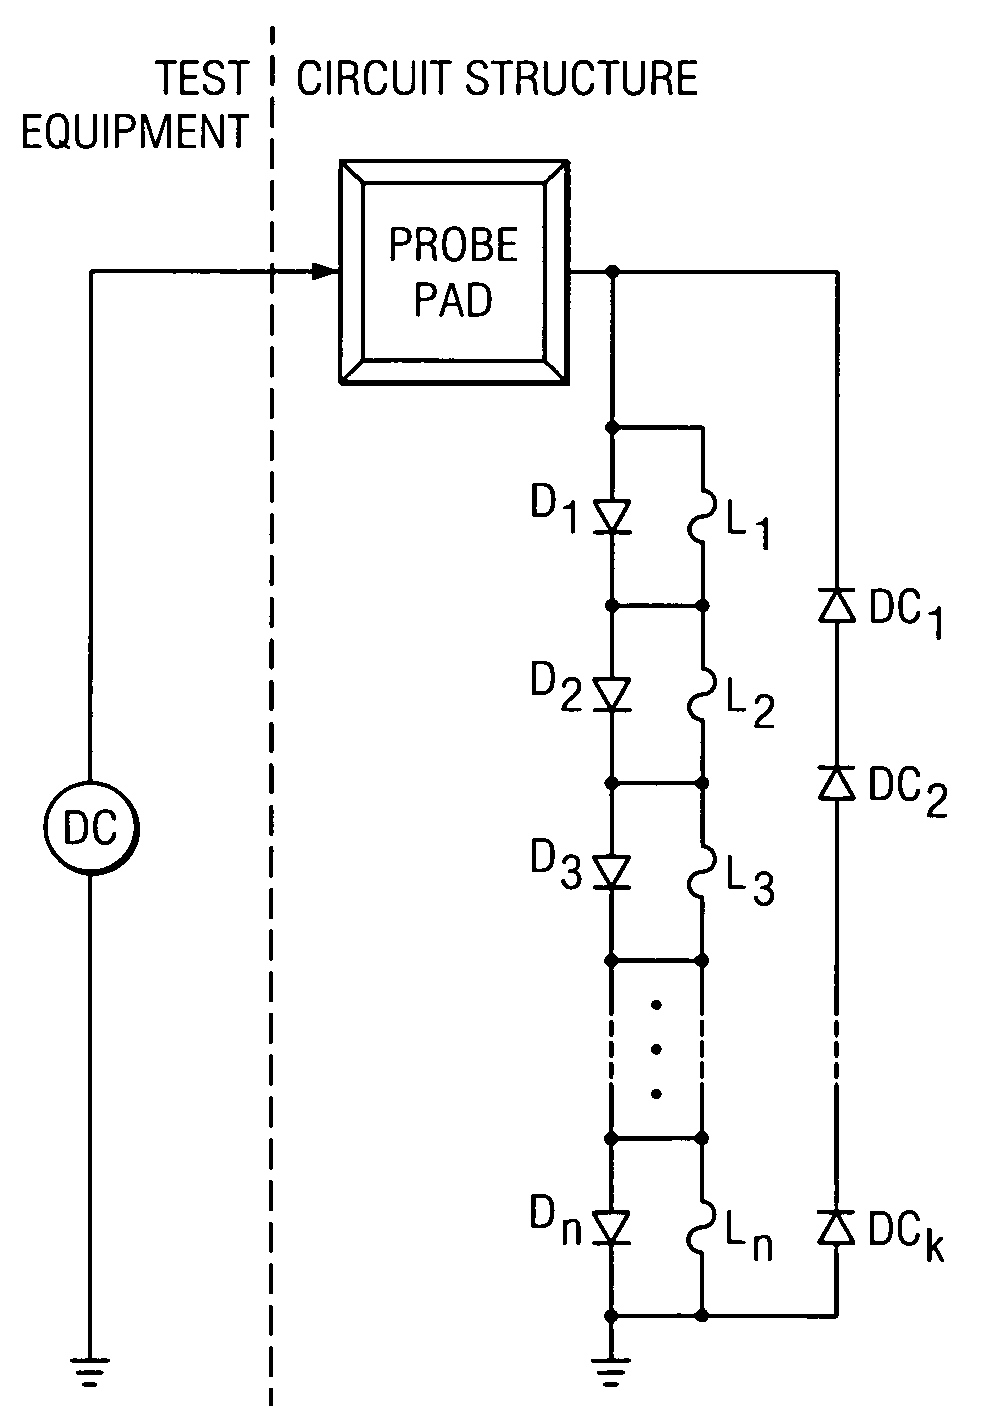 Device for recording laser trim progress and for detecting laser beam misalignment